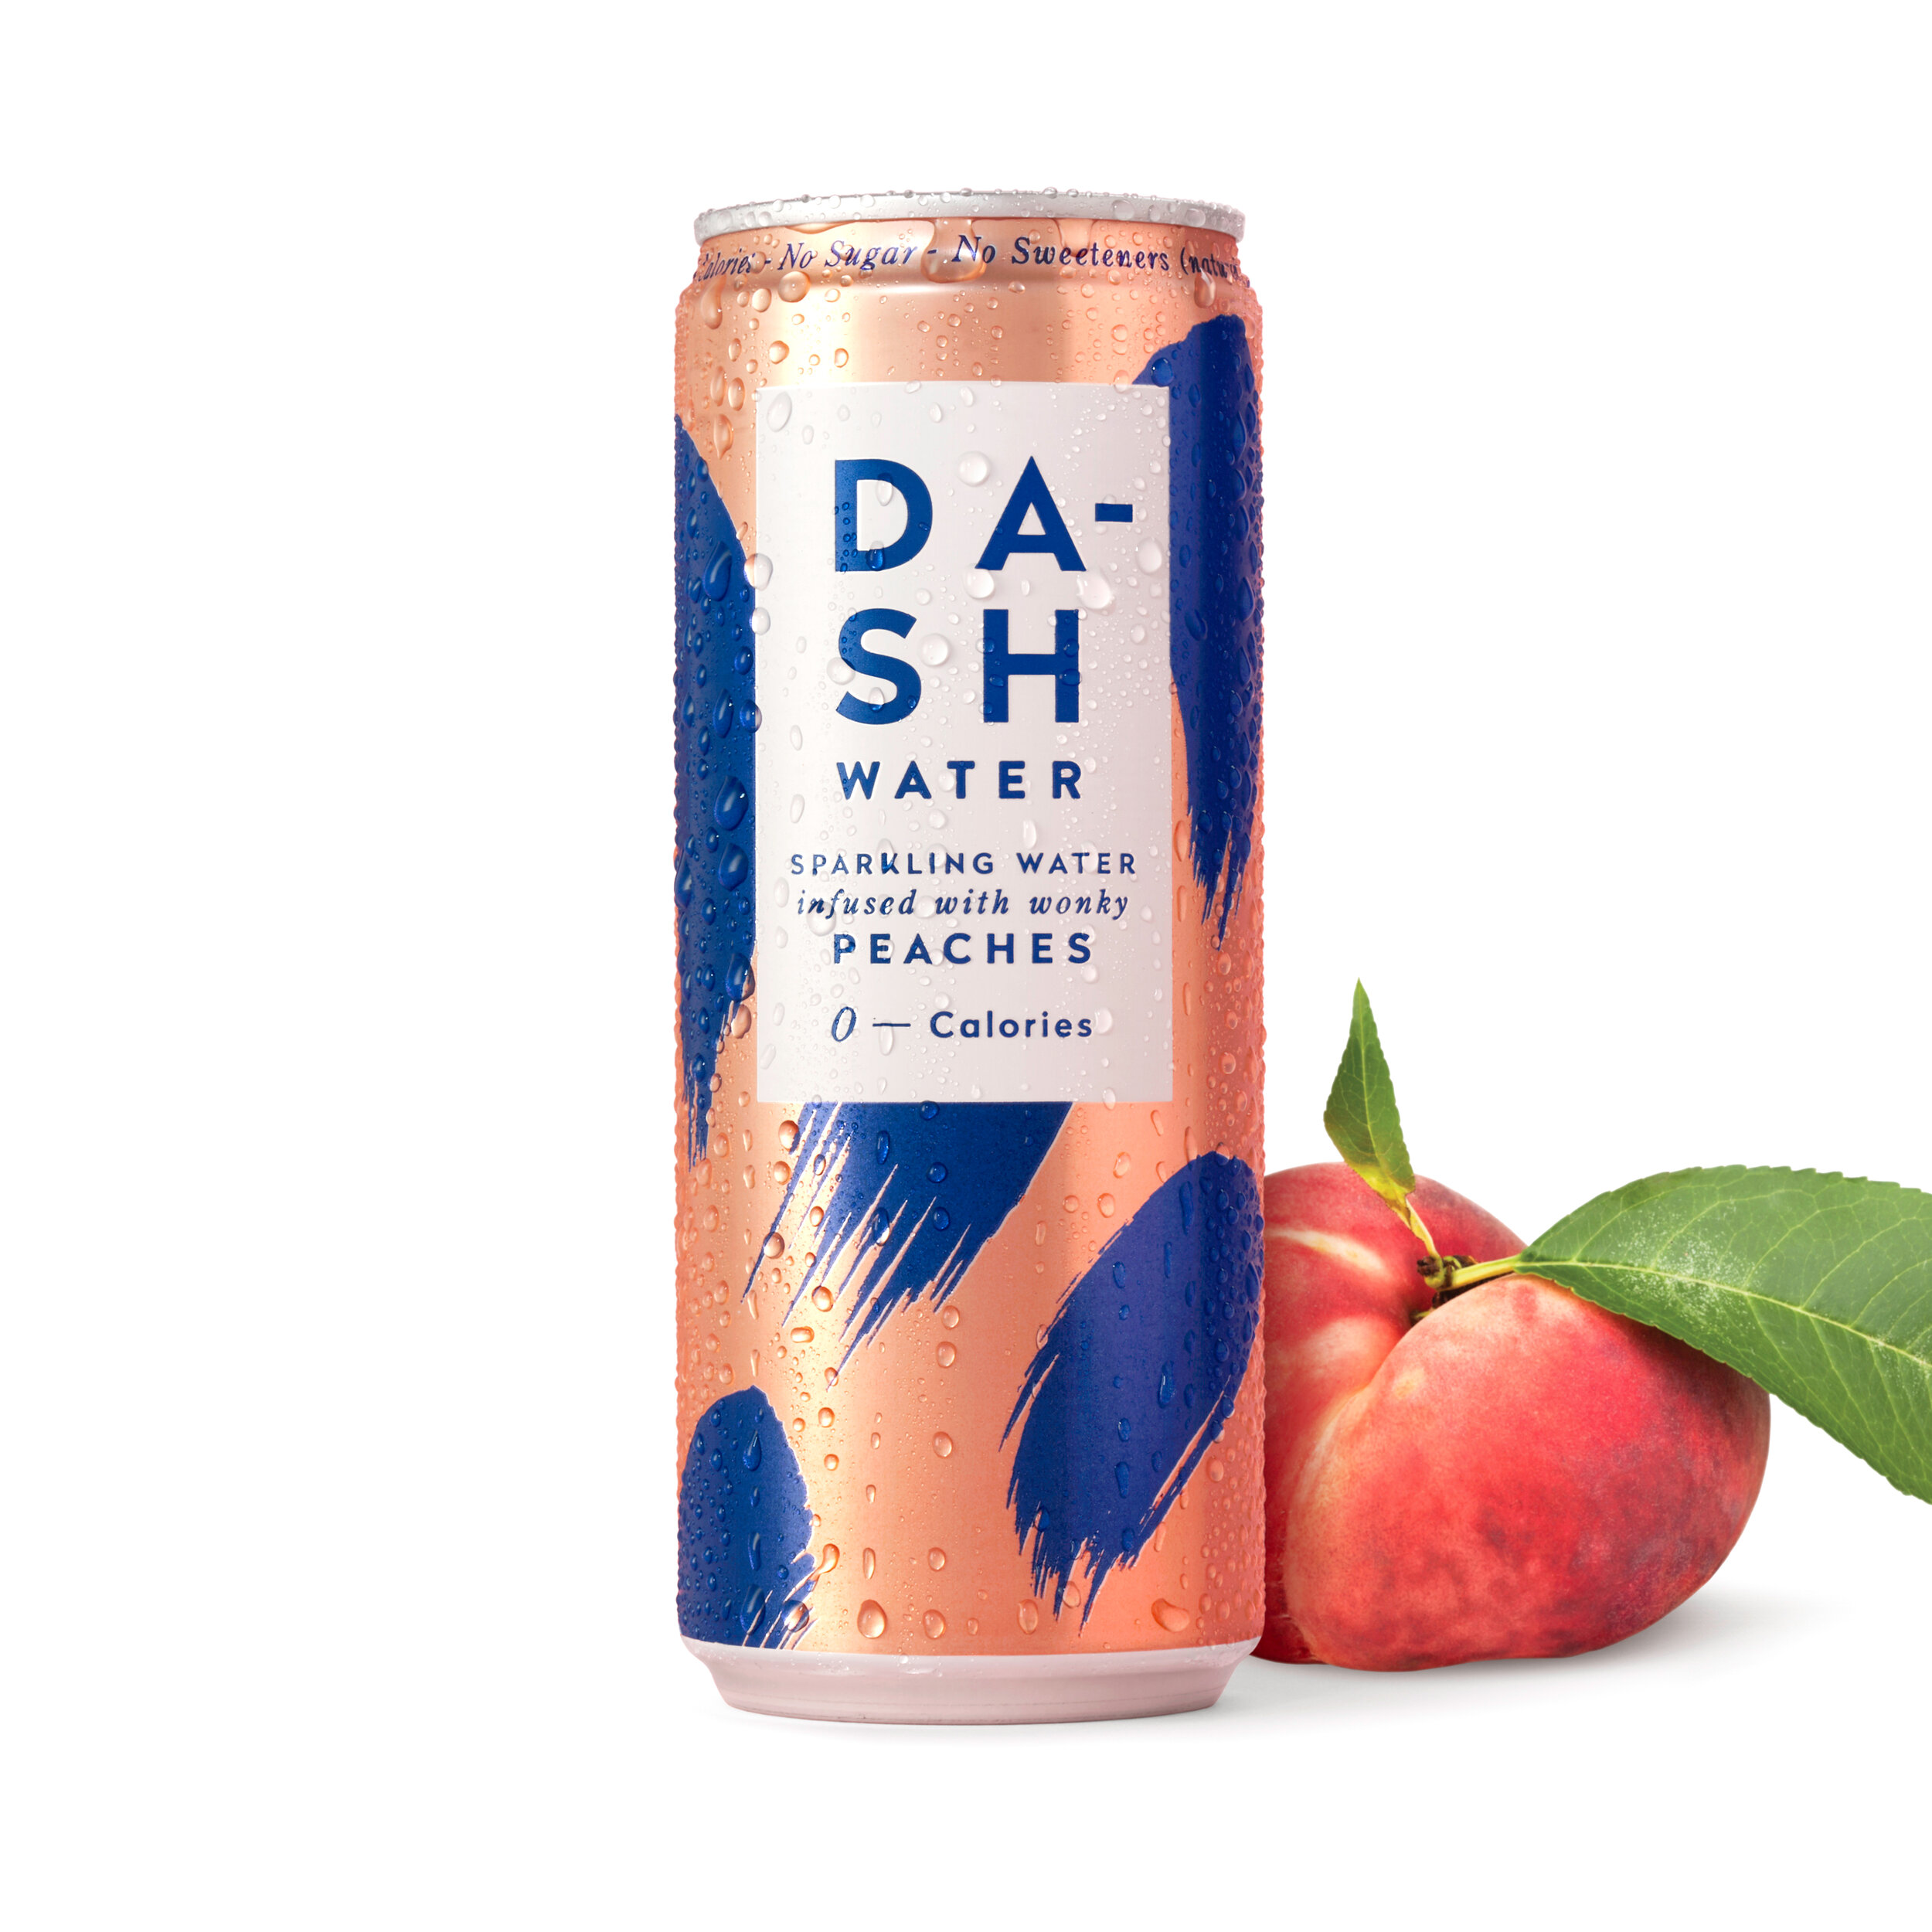 Dash, $24.98 (Pack of 12)